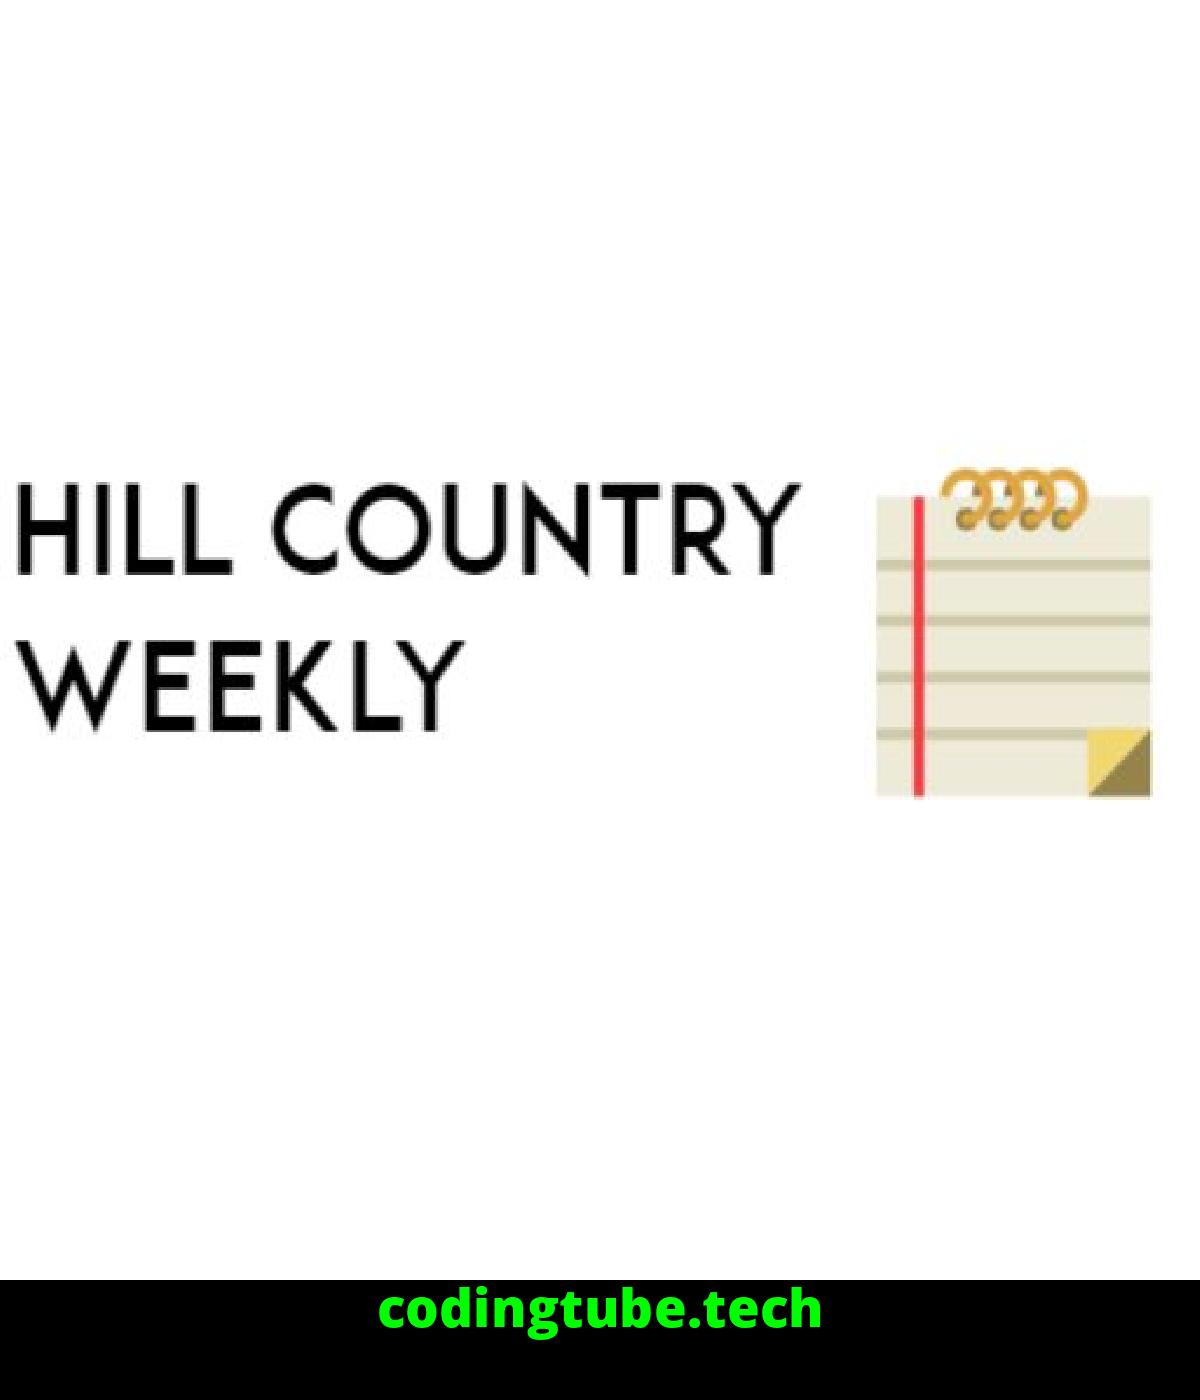 https://www.hillcountryweekly.com/Hill Country Weekly - The 